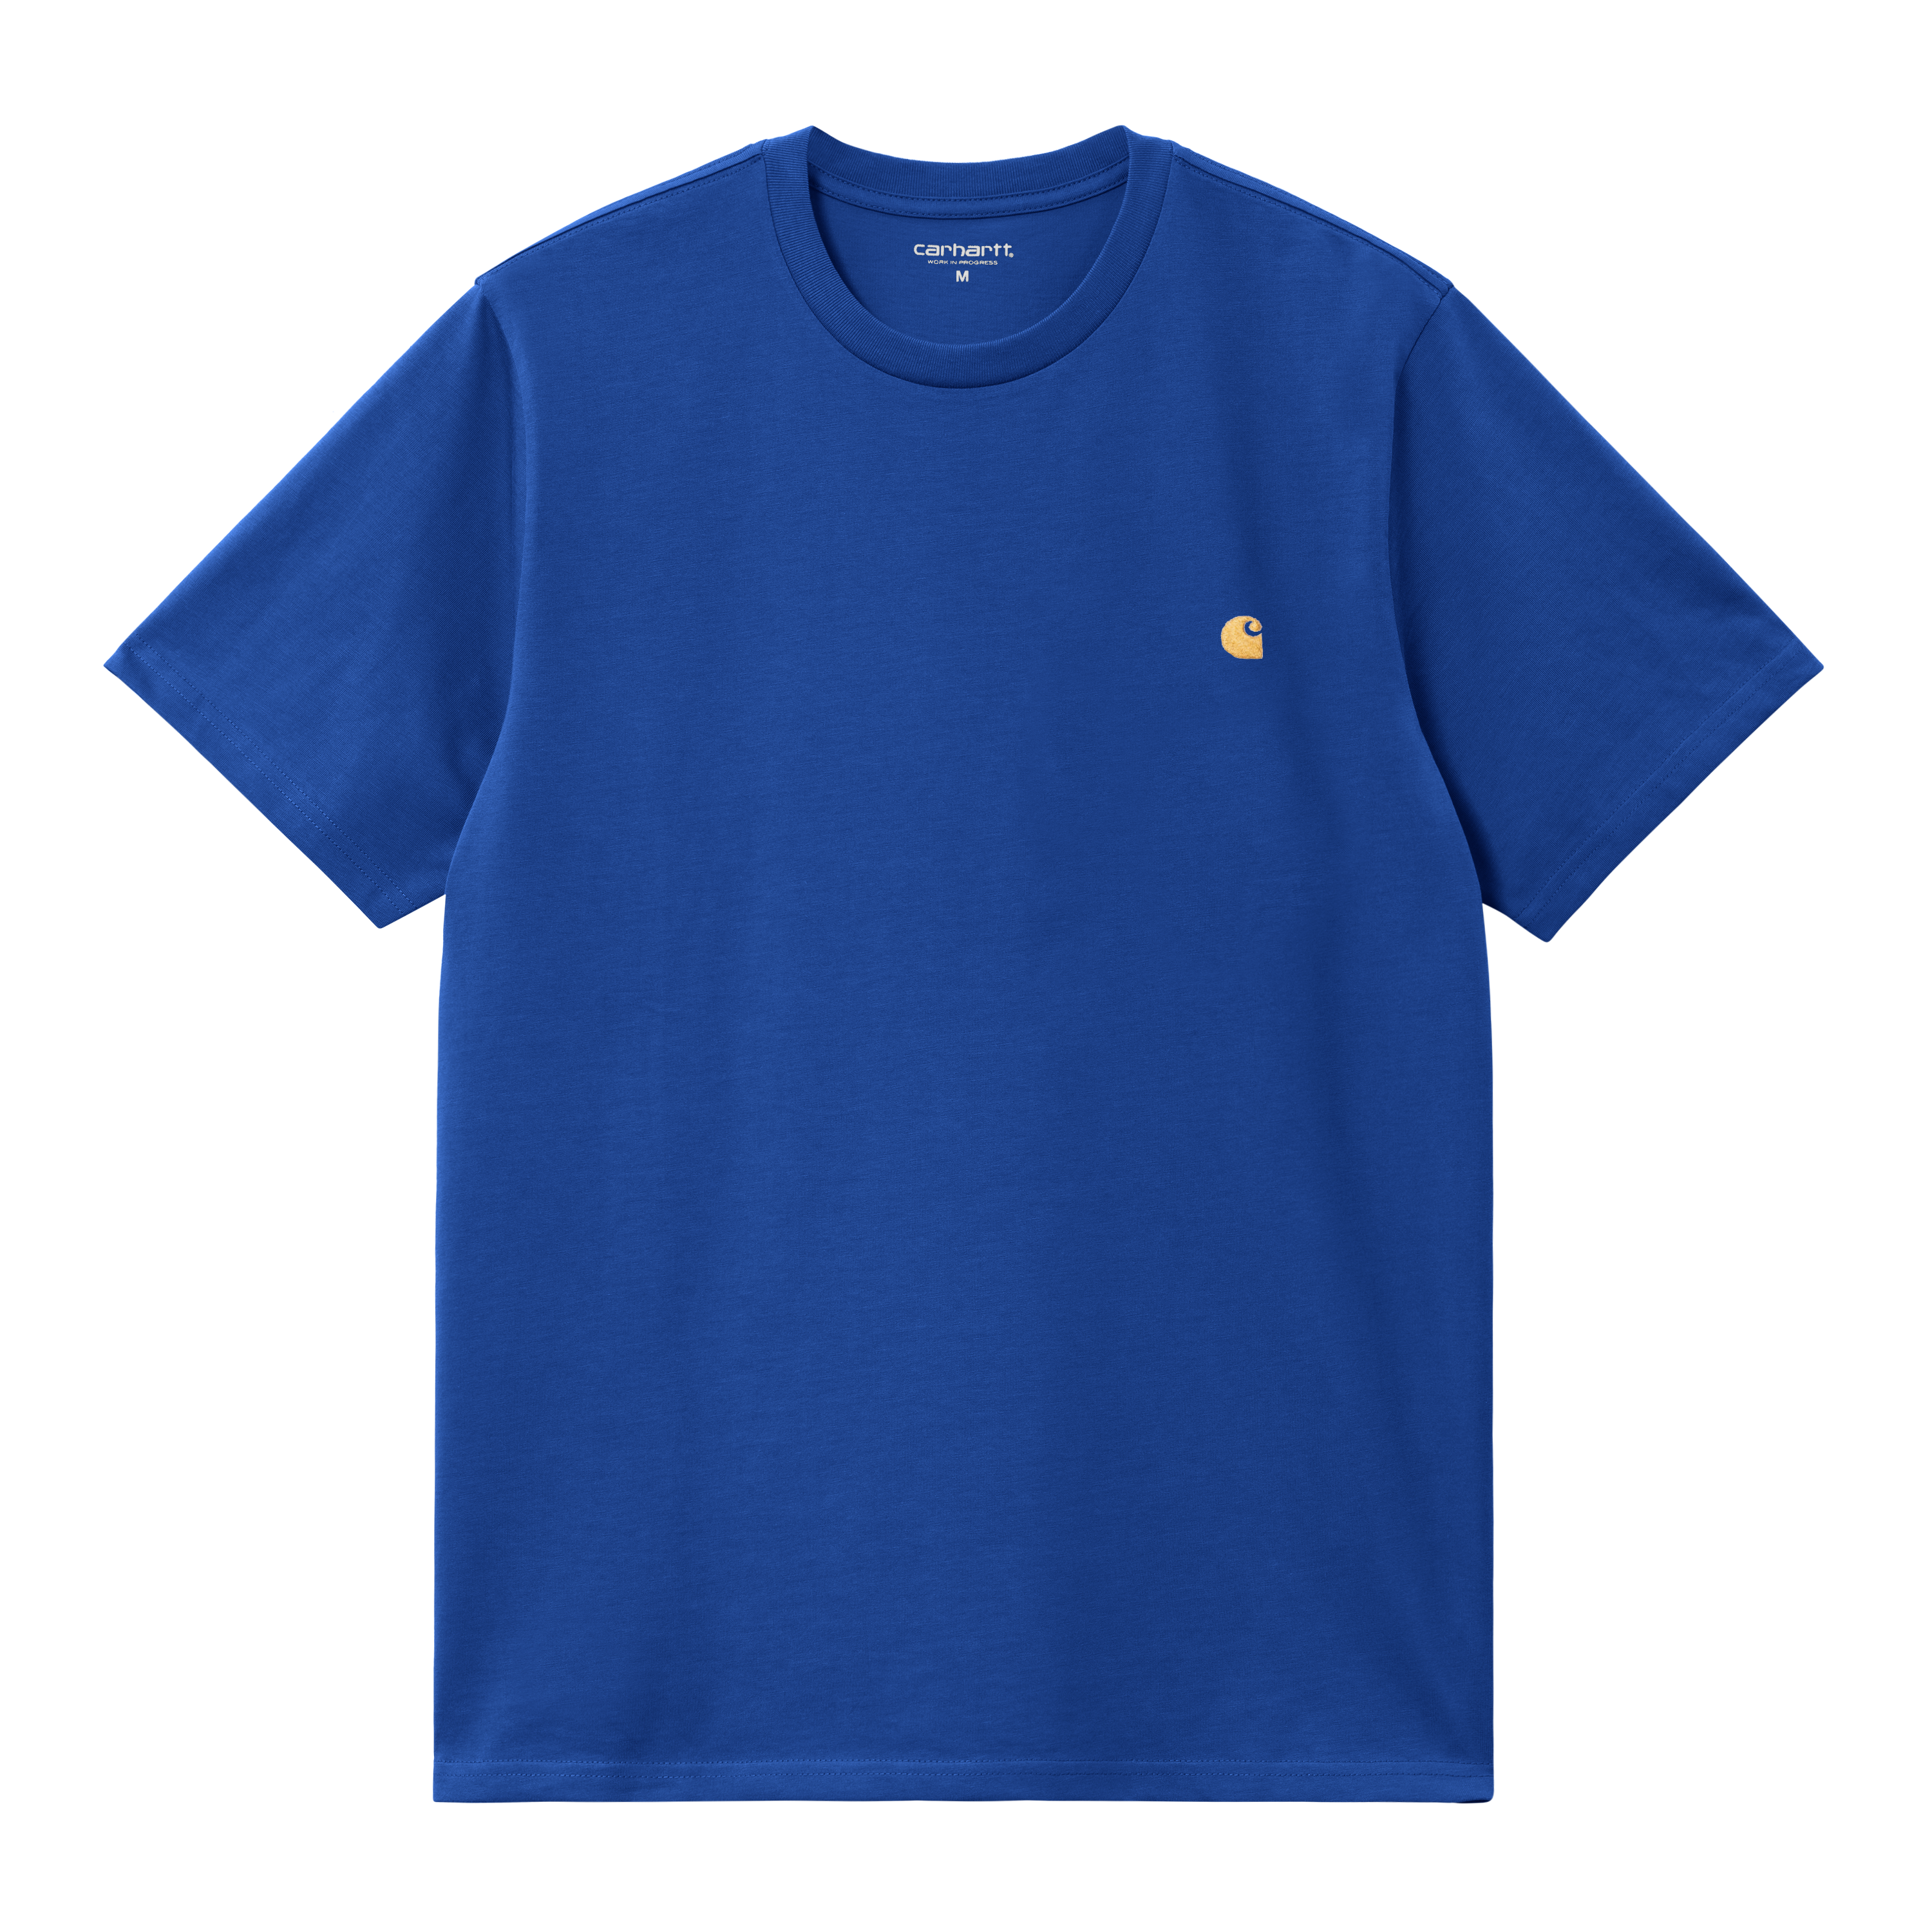 Carhartt WIP - CHASE T-SHIRT - Acapulco/Gold